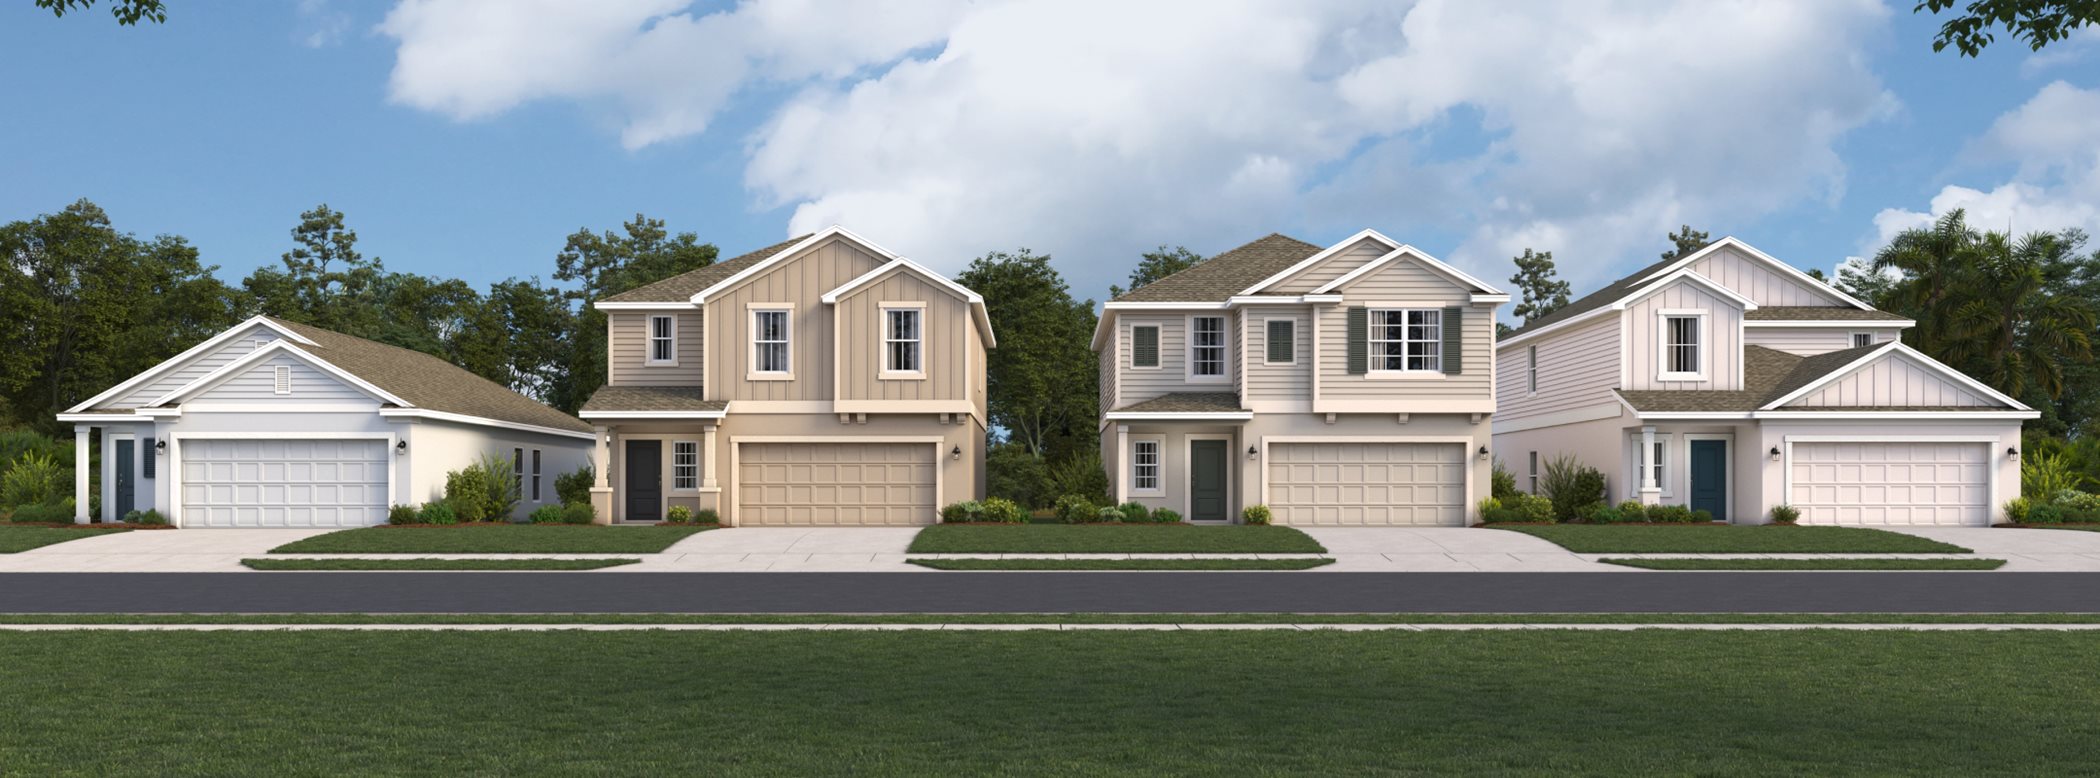 Lawson Dunes Grand Collection streetscape rendering